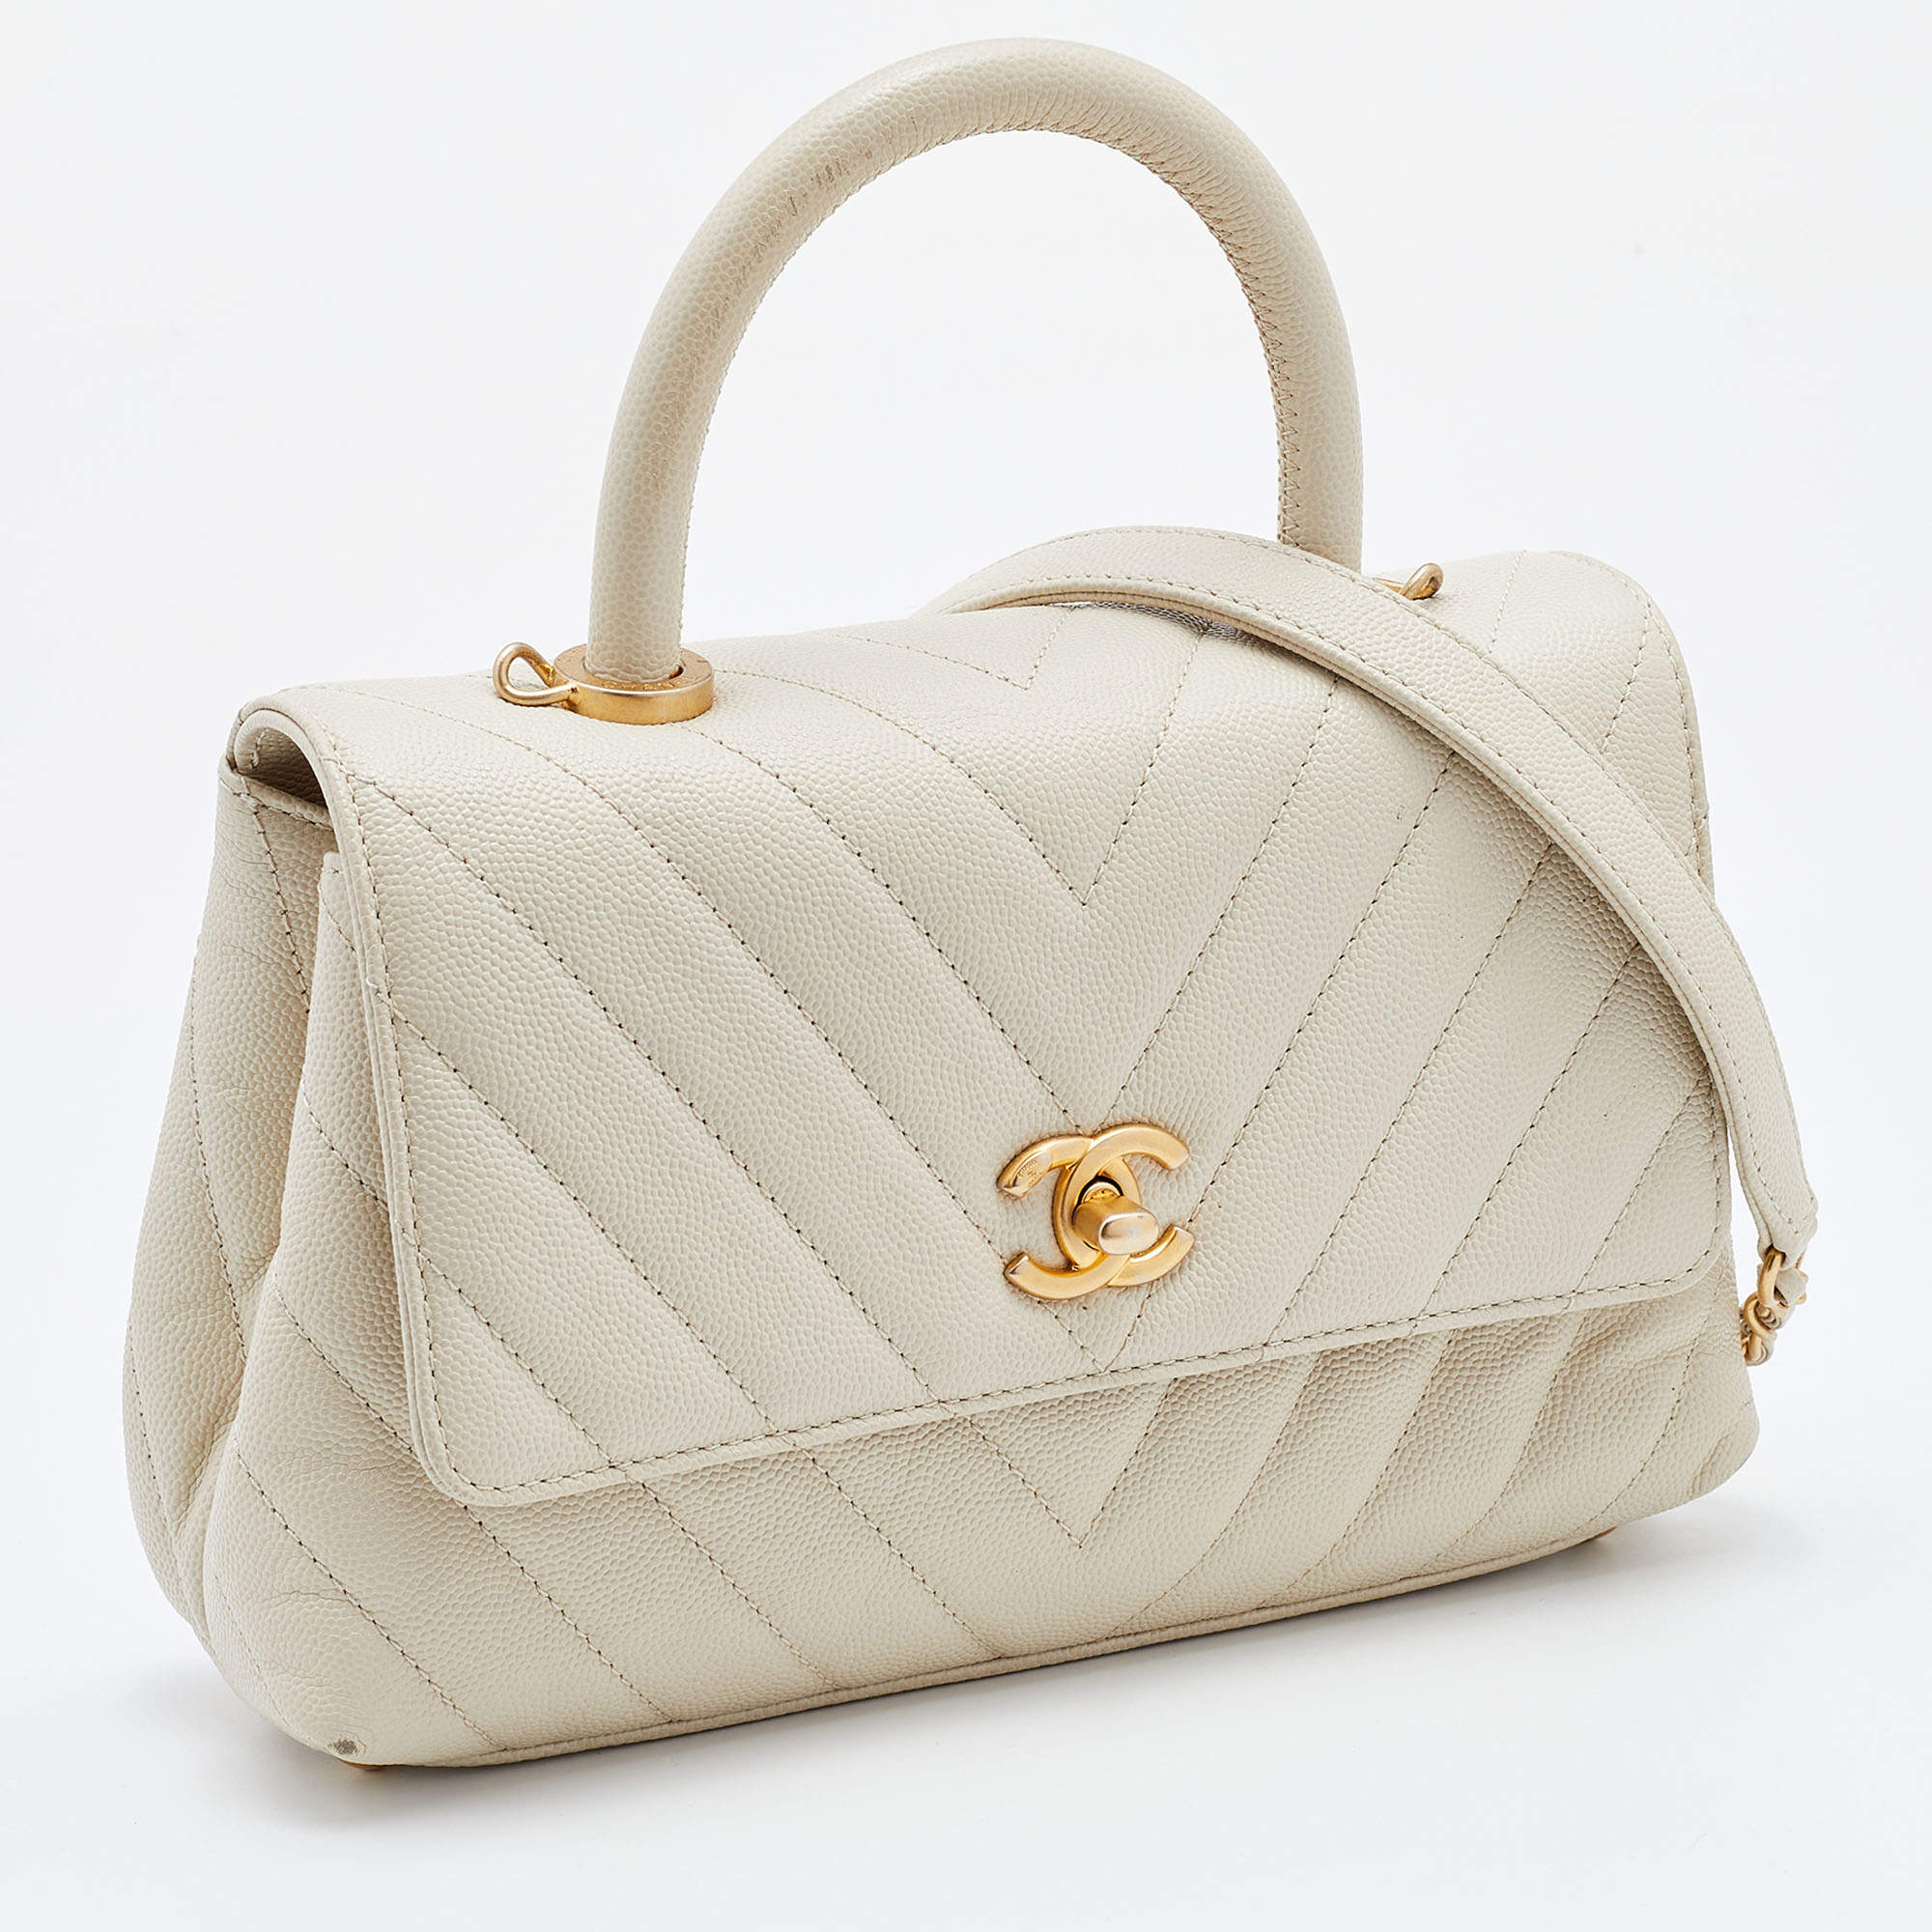 Chanel White Chevron Quilted Caviar Leather Mmall Coco Handle Bag Chanel